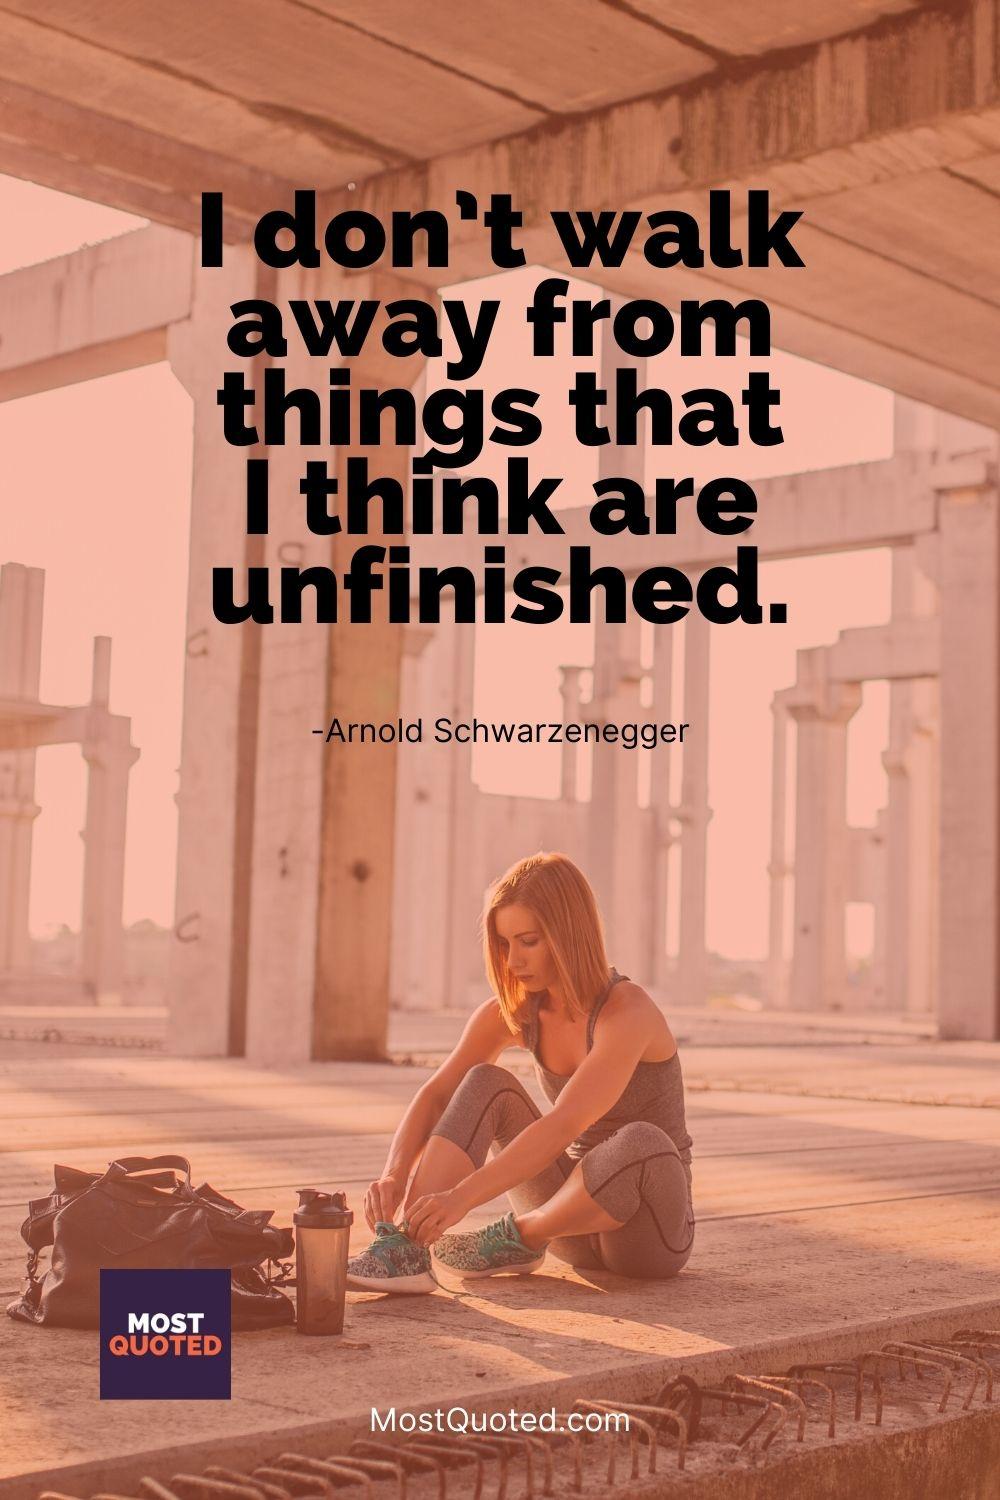 I don’t walk away from things that I think are unfinished. - Arnold Schwarzenegger